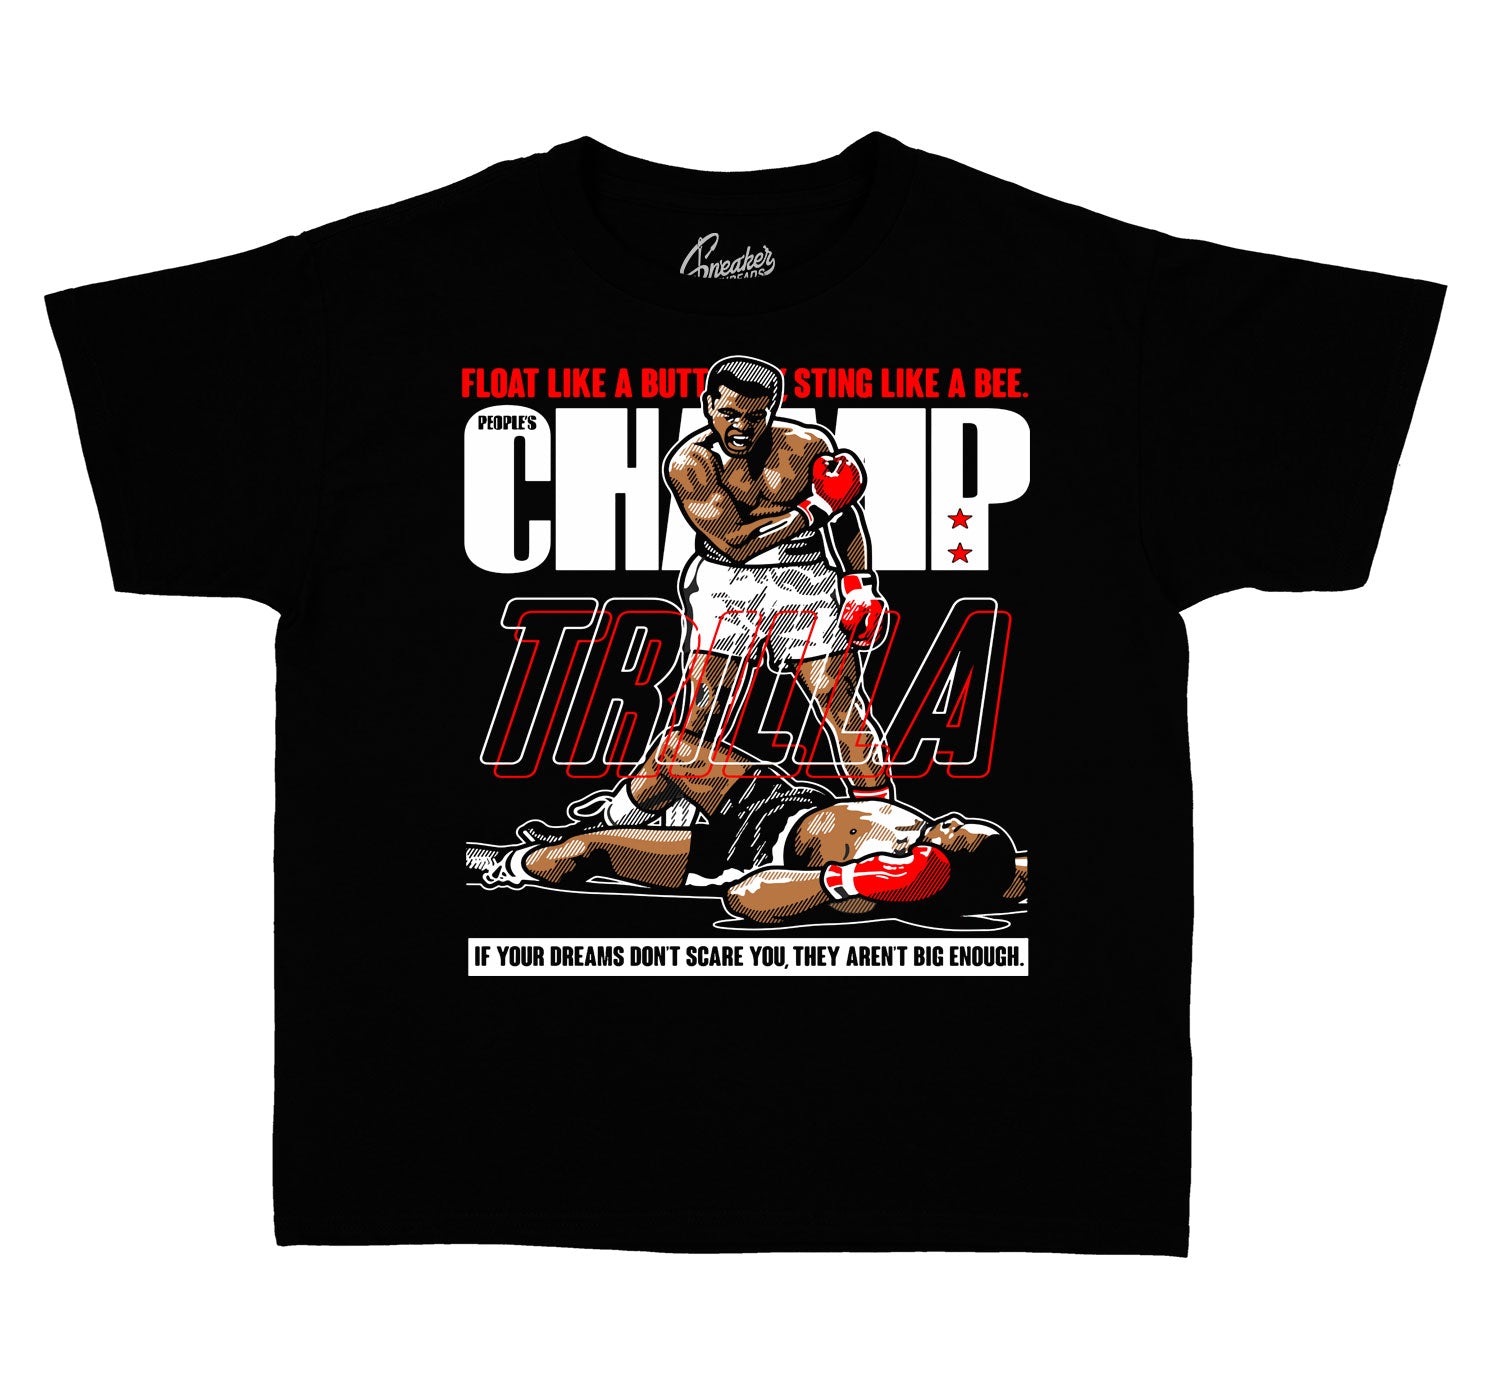 Retro 5 Raging Bull Shirts to complete your outfit